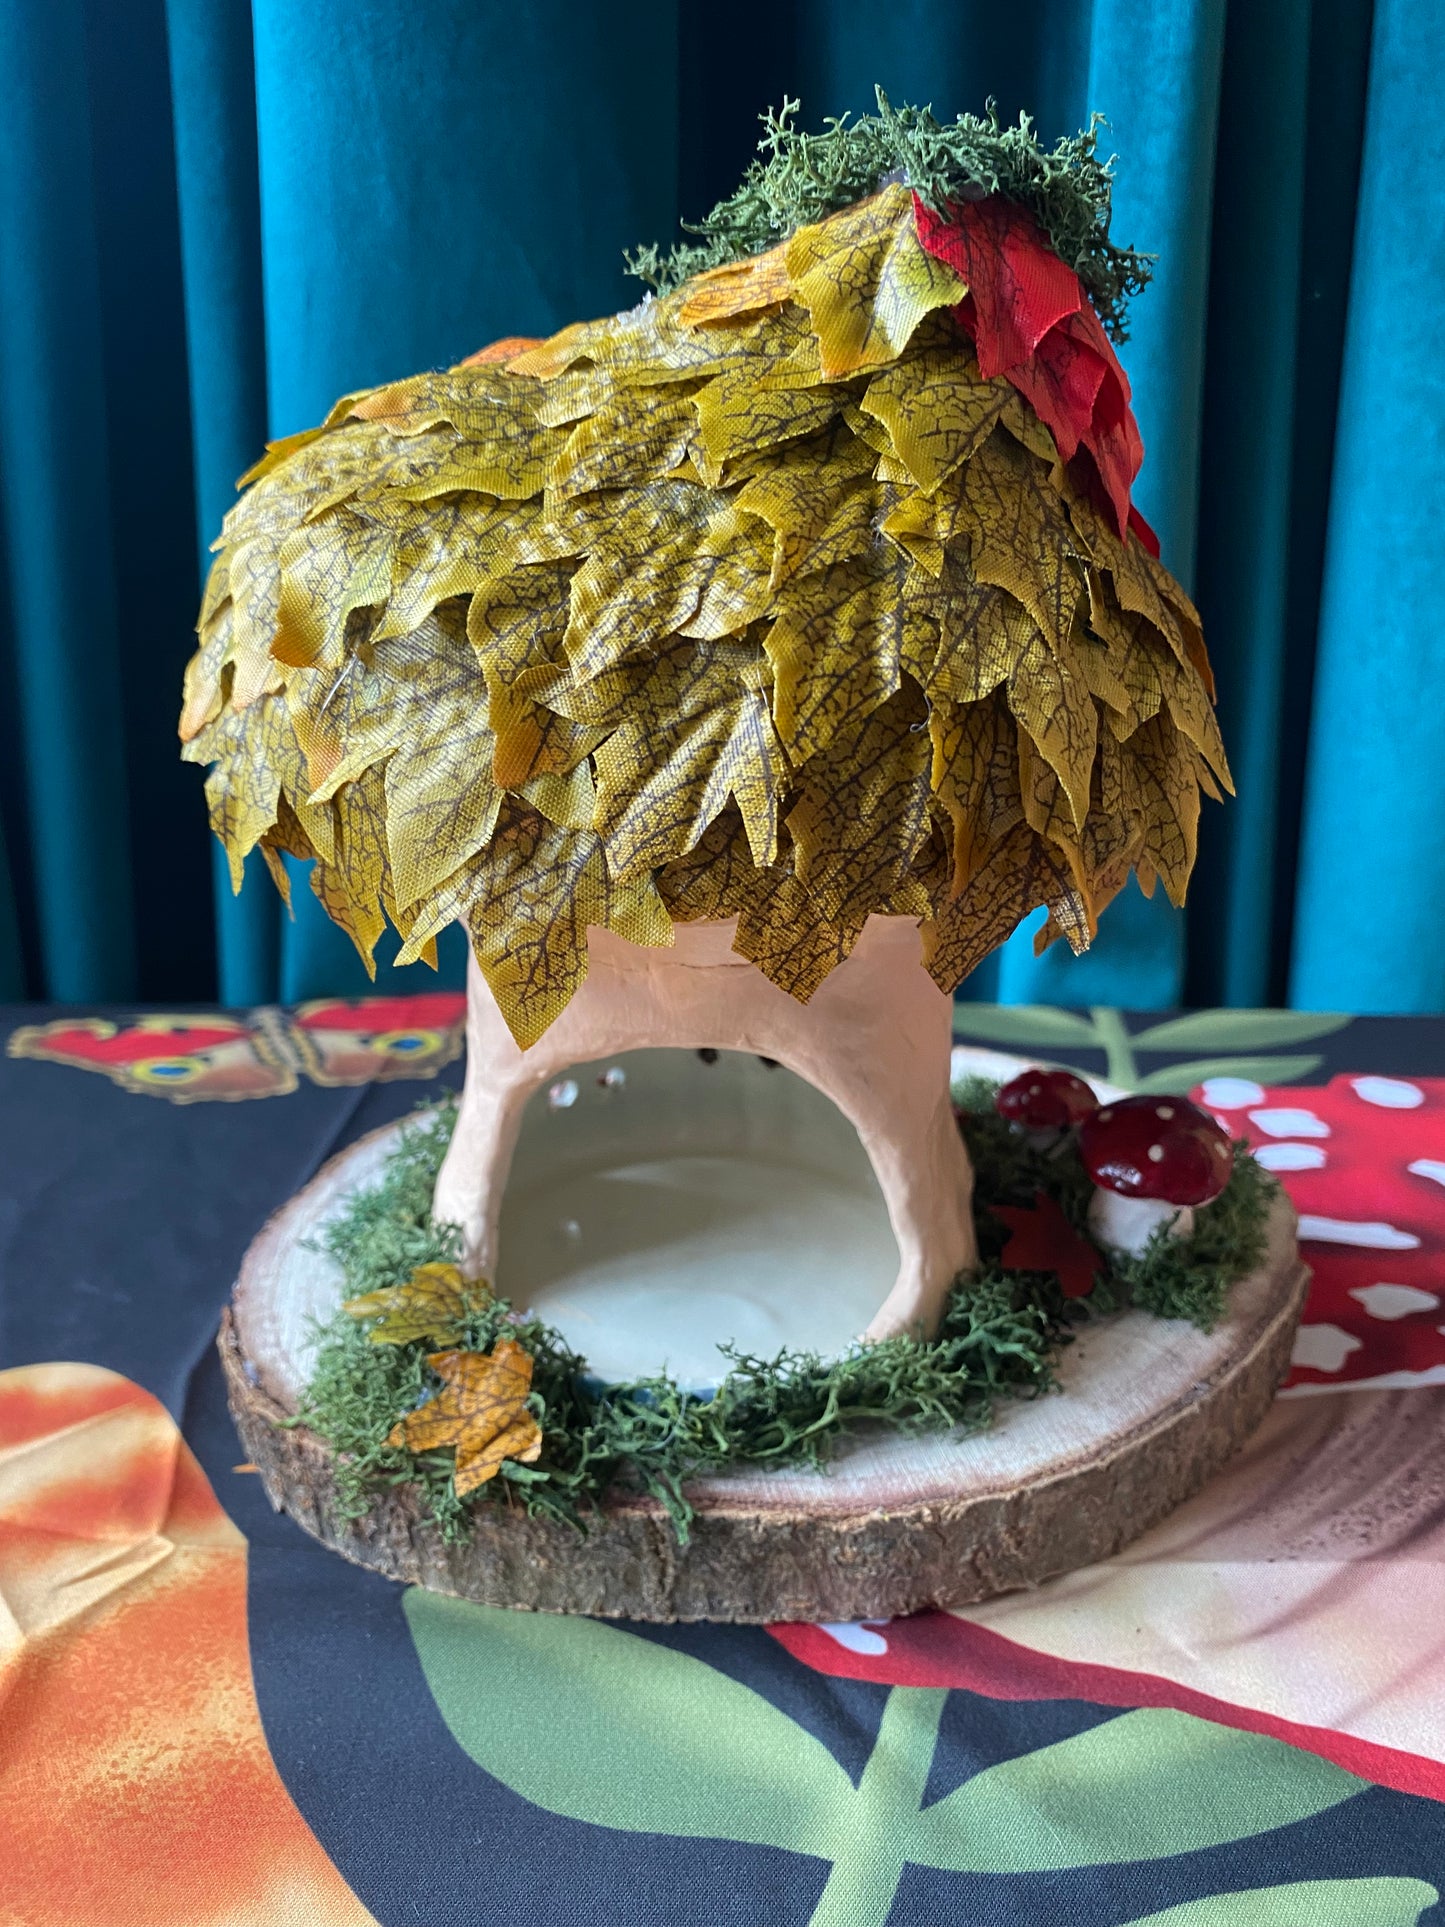 ✨🍄 Unique Hand-Crafted Toadstool Tea-light Cottage 🍄✨